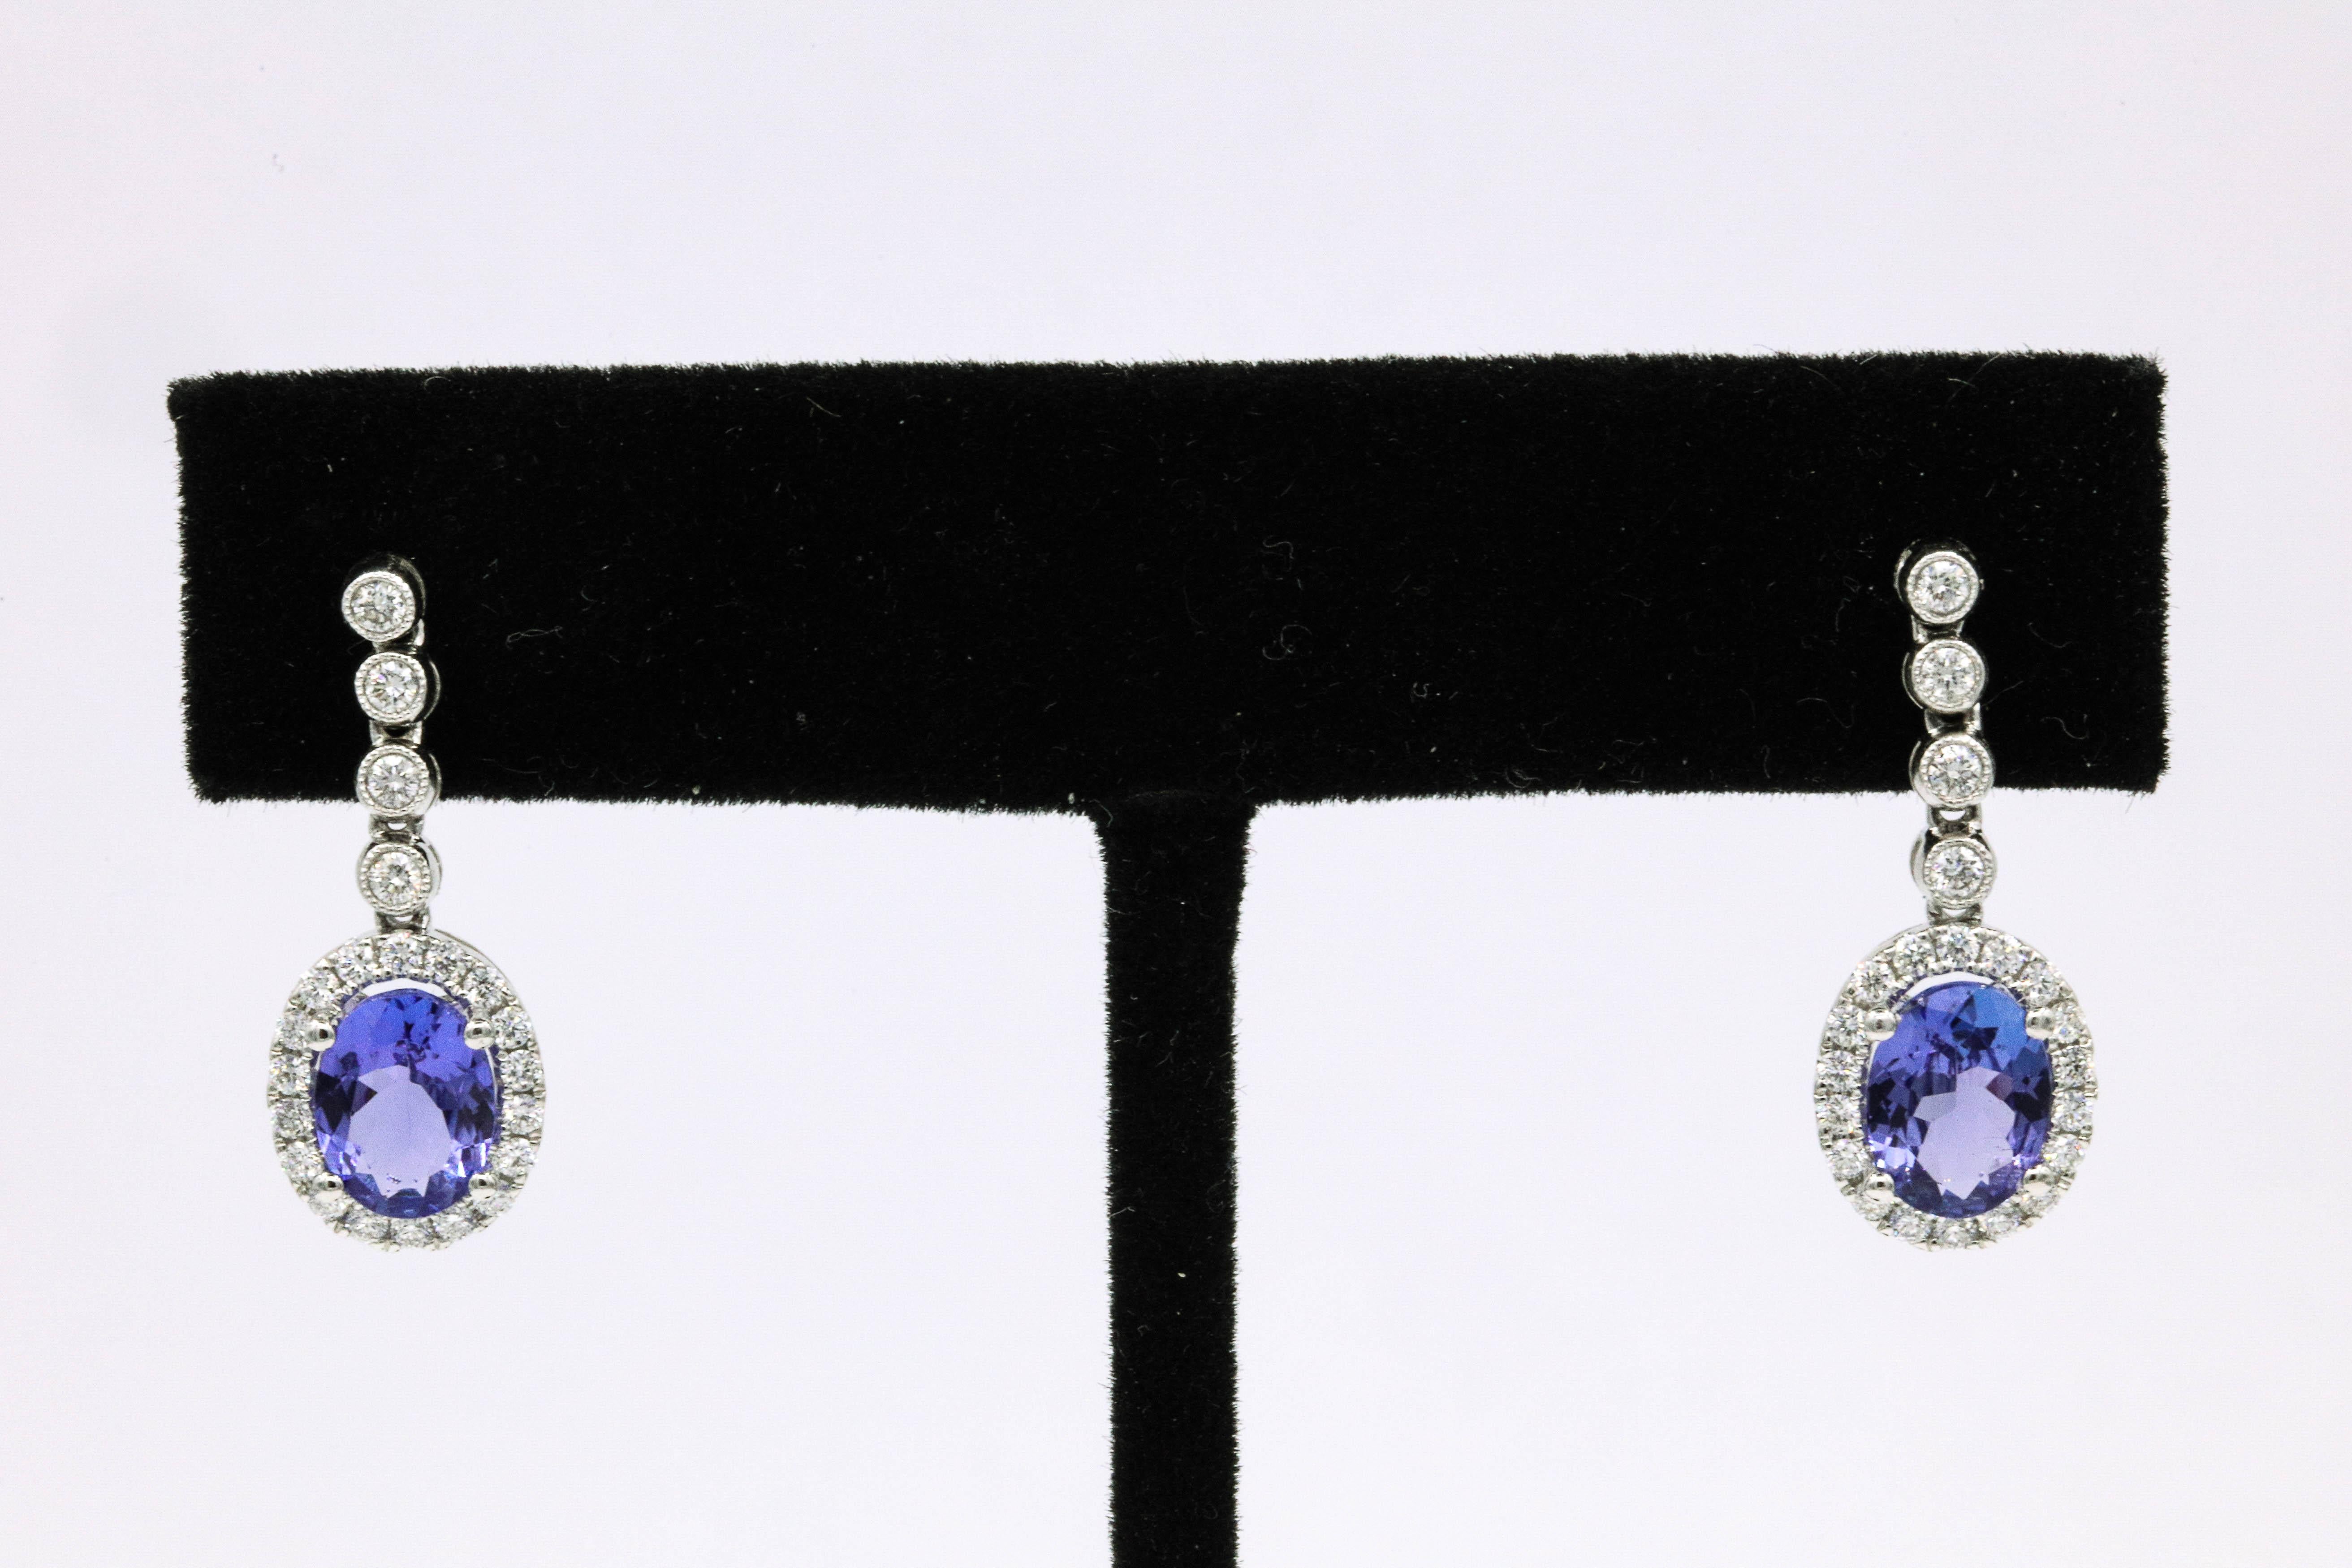 18k White Gold drop earrings featuring two oval shape tanzanites, 2.60 carats surrounded by round brilliants weighing 0.55 carats.
Color G-H
Clarity SI